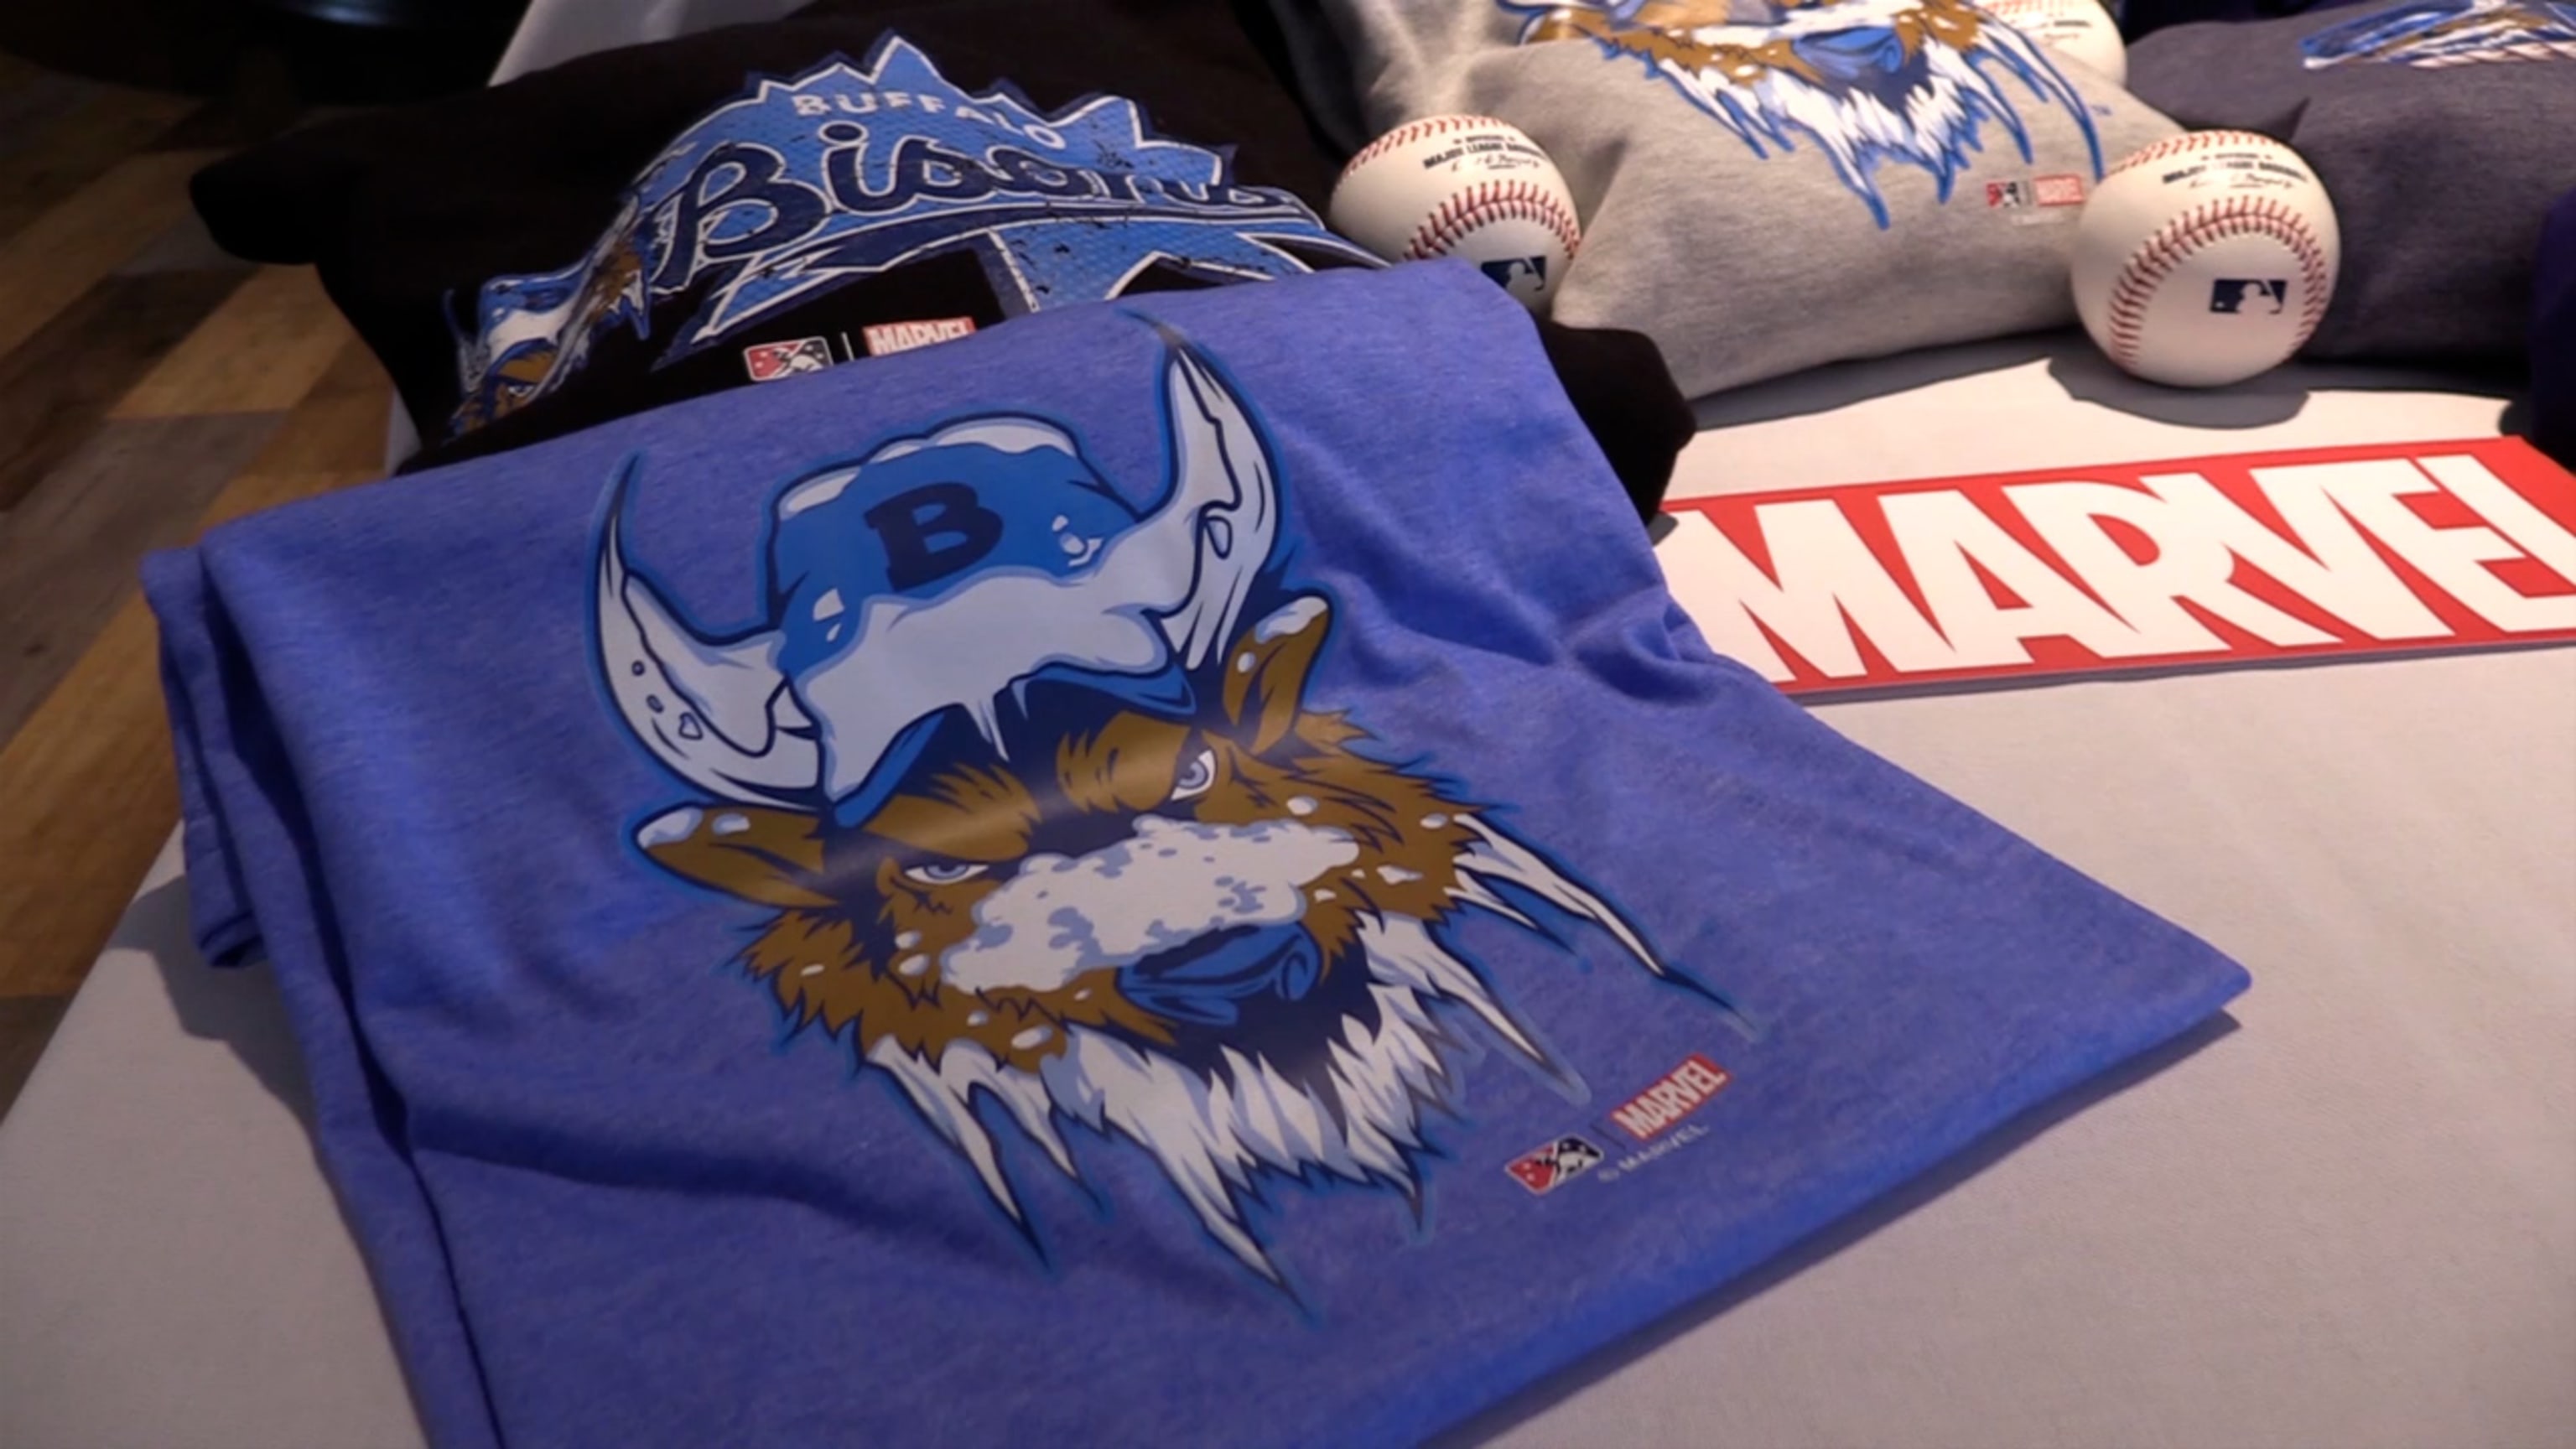 26 Shirts to sell gear celebrating Blue Jays playing in Buffalo